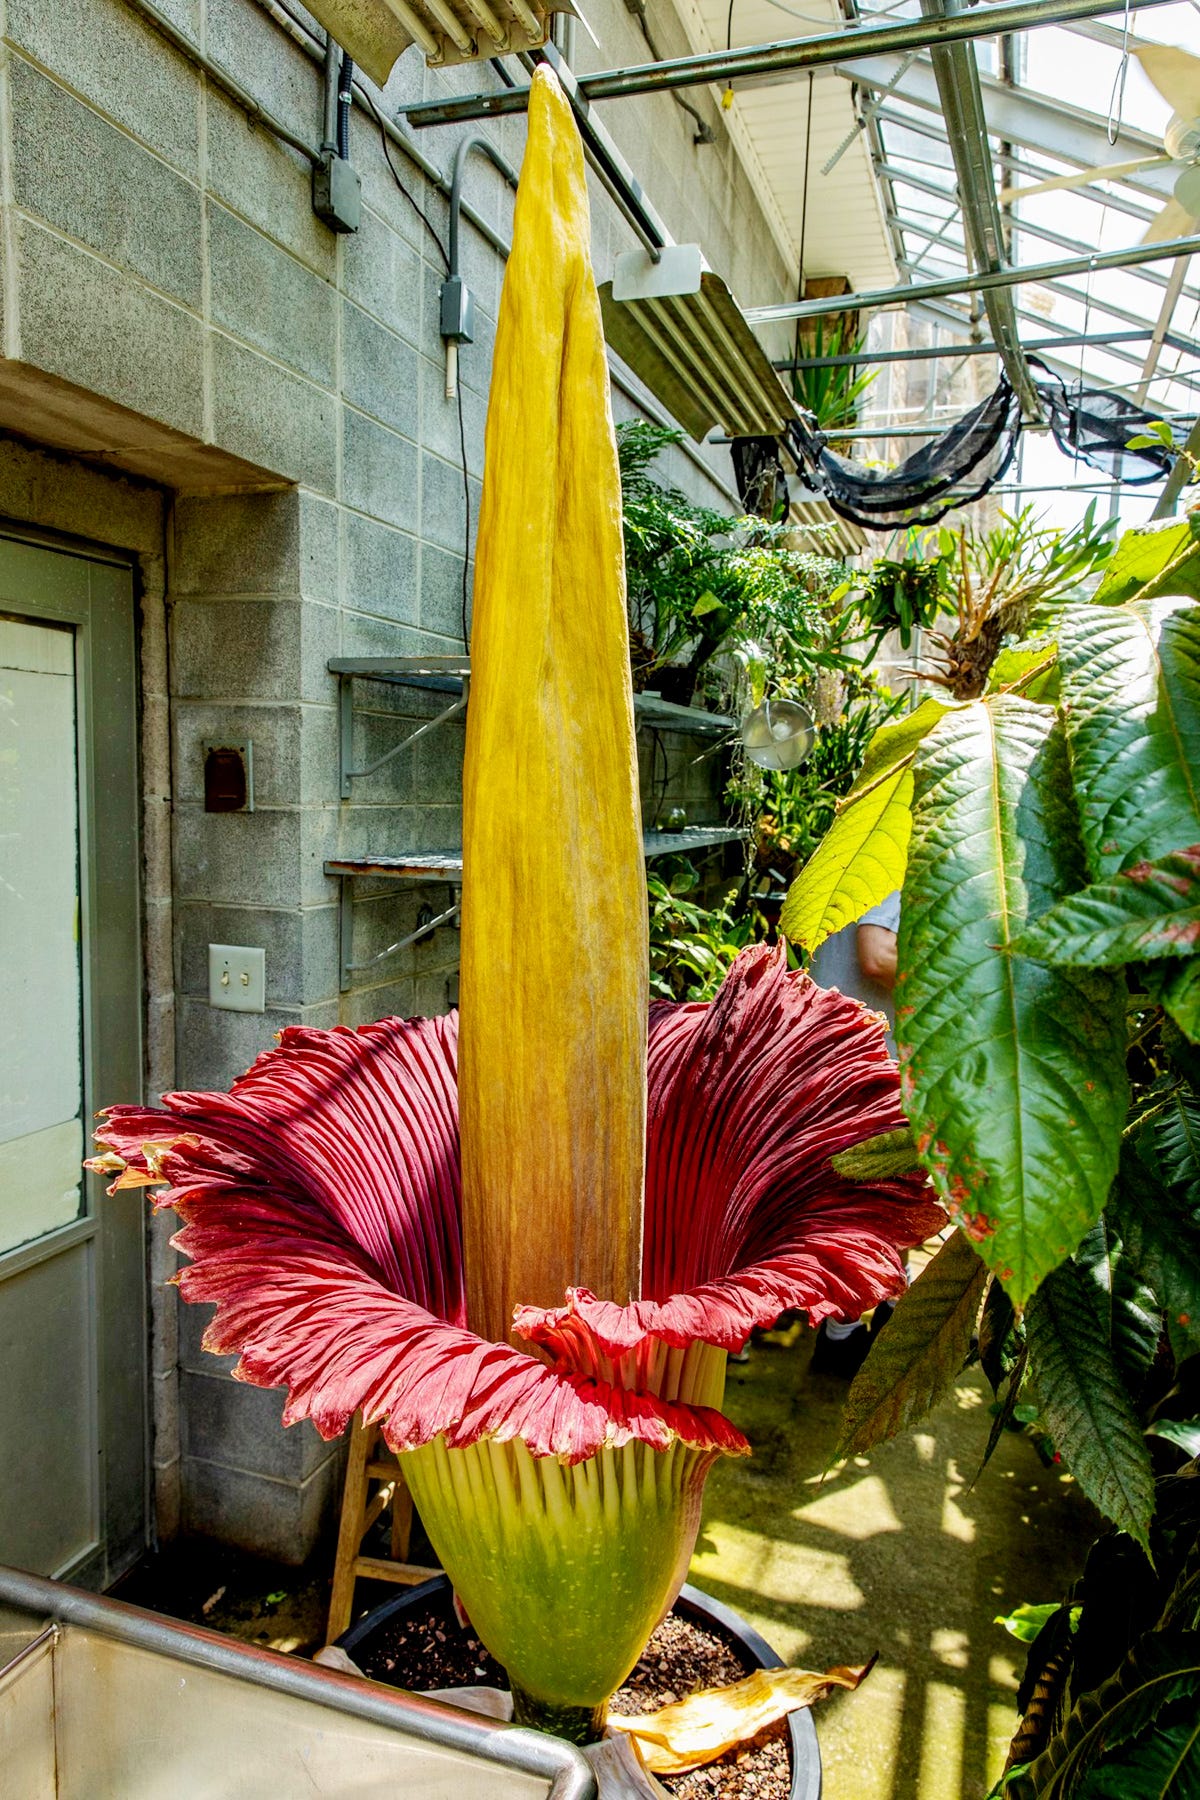 Corpse Flower Blooms For The First Time At Tennessee S Sewanee University